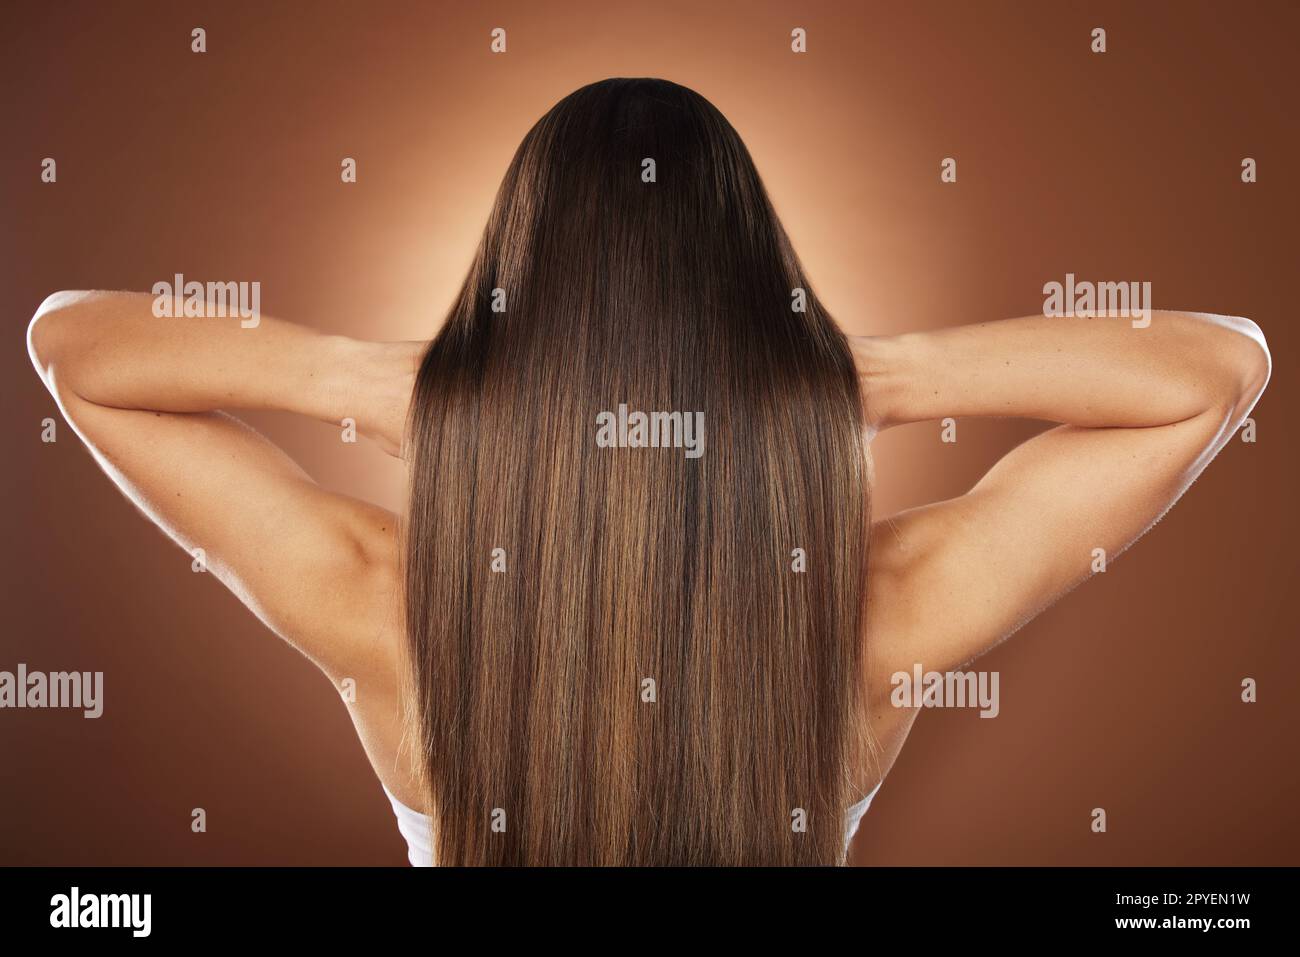 Woman, back or hair style on brown background in relax studio for keratin treatment, self care wellness or color dye routine. Model, texture or brunette growth aesthetic with balayage transformation Stock Photo